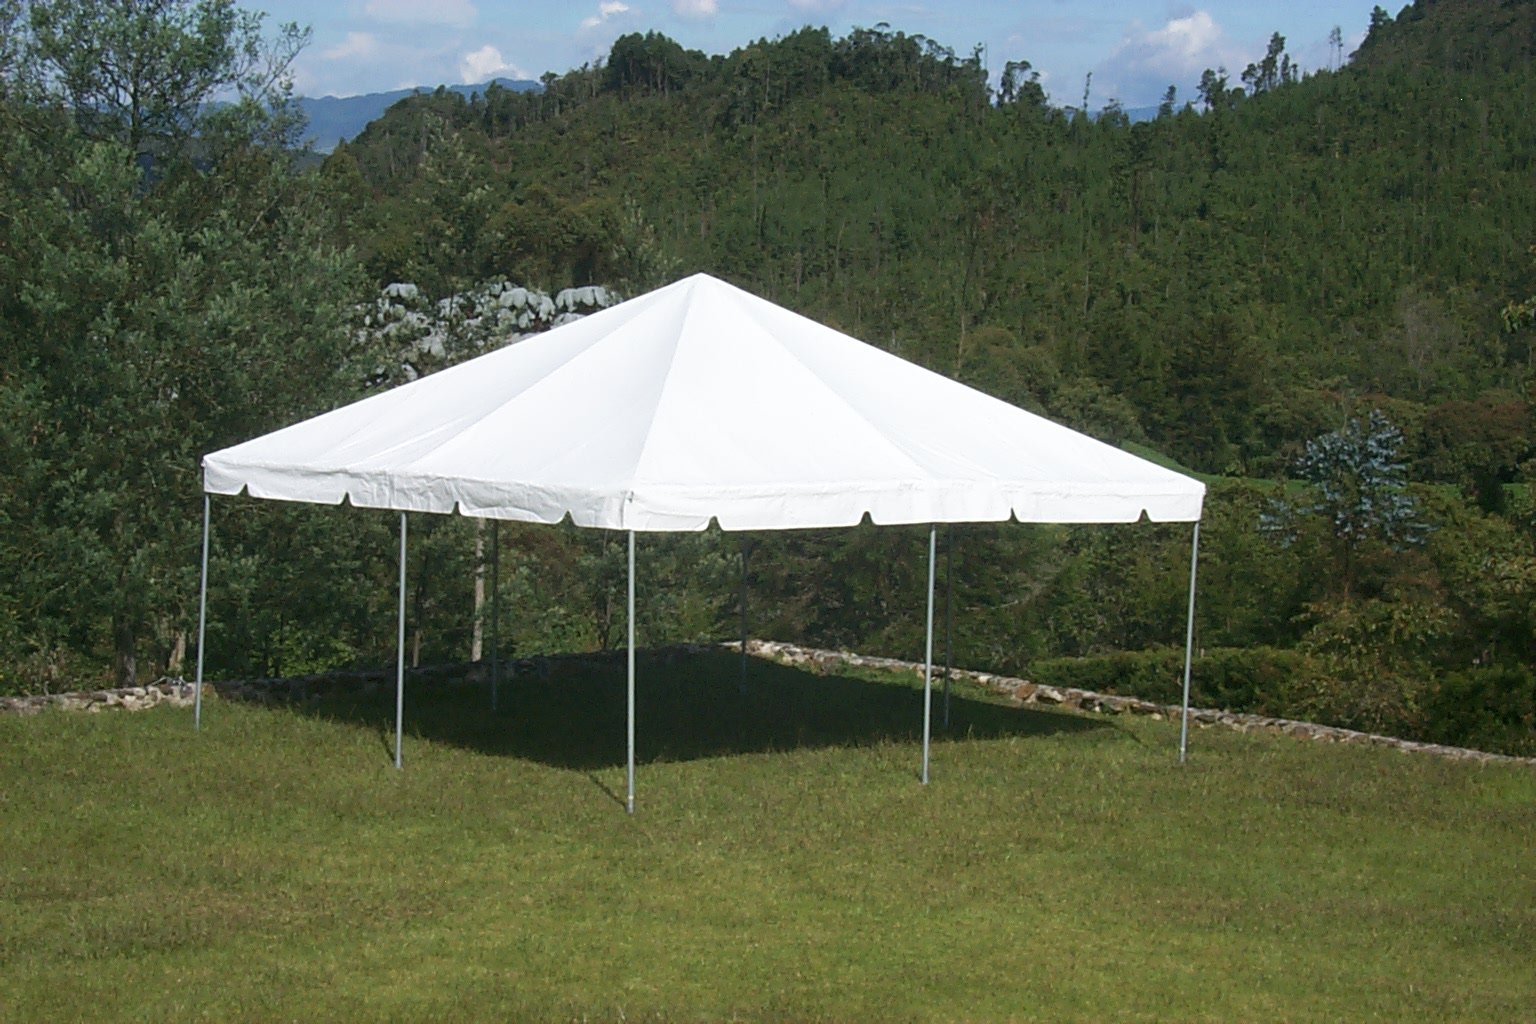 20x20 Traditional Frame Tent Kit